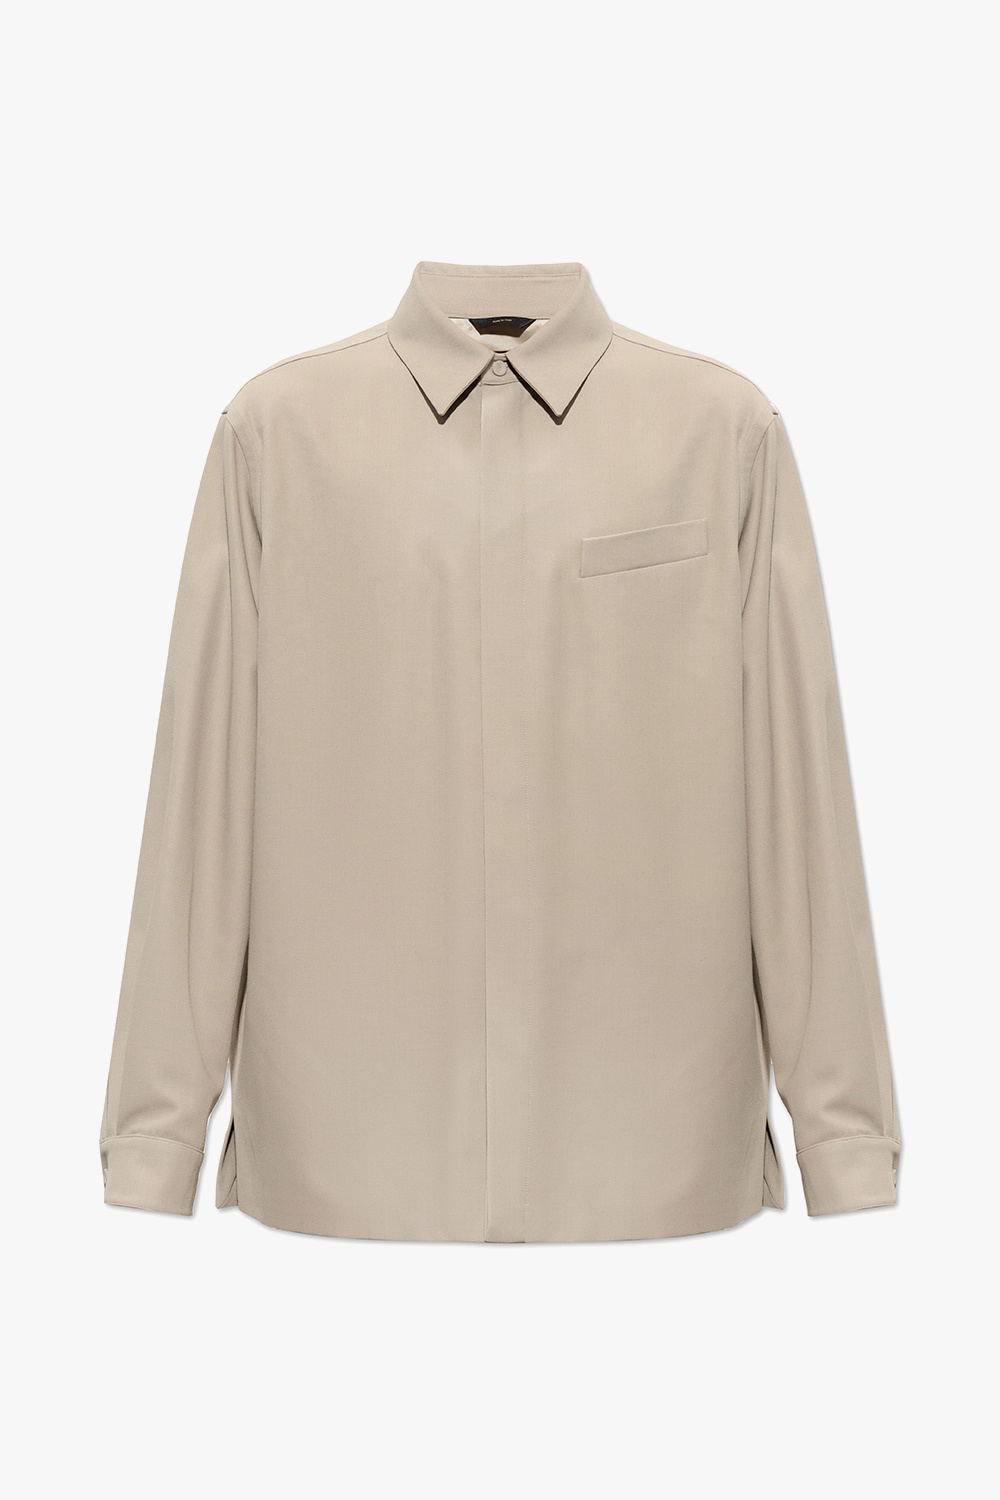 Fendi Shirt with concealed placket